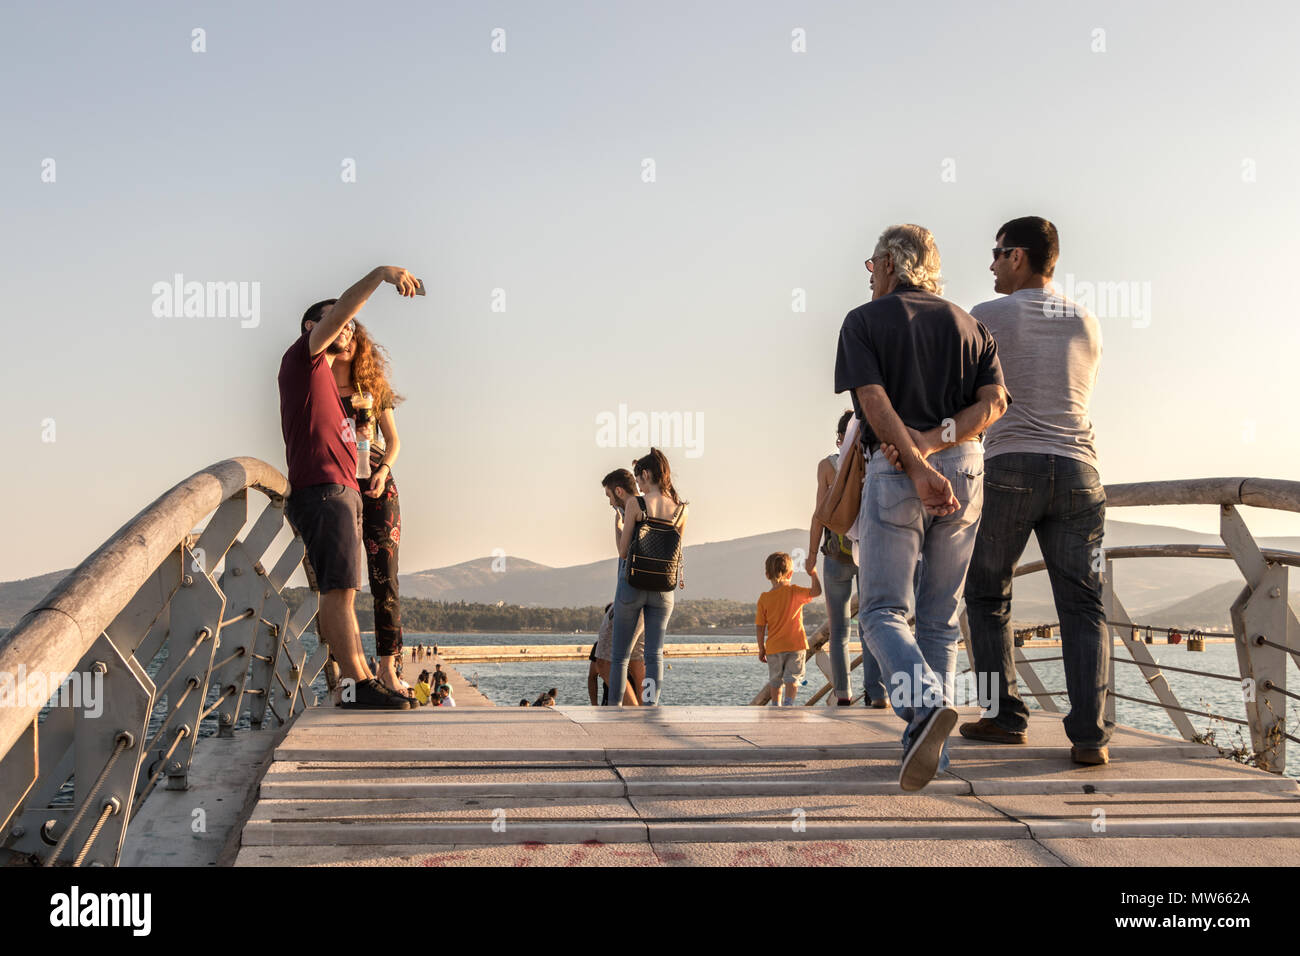 Volos, Thessaly, Greece - May 27th, 2018: People walking and taking photos on a little bridge at the Port of Volos, Pagasetic Gulf. Stock Photo